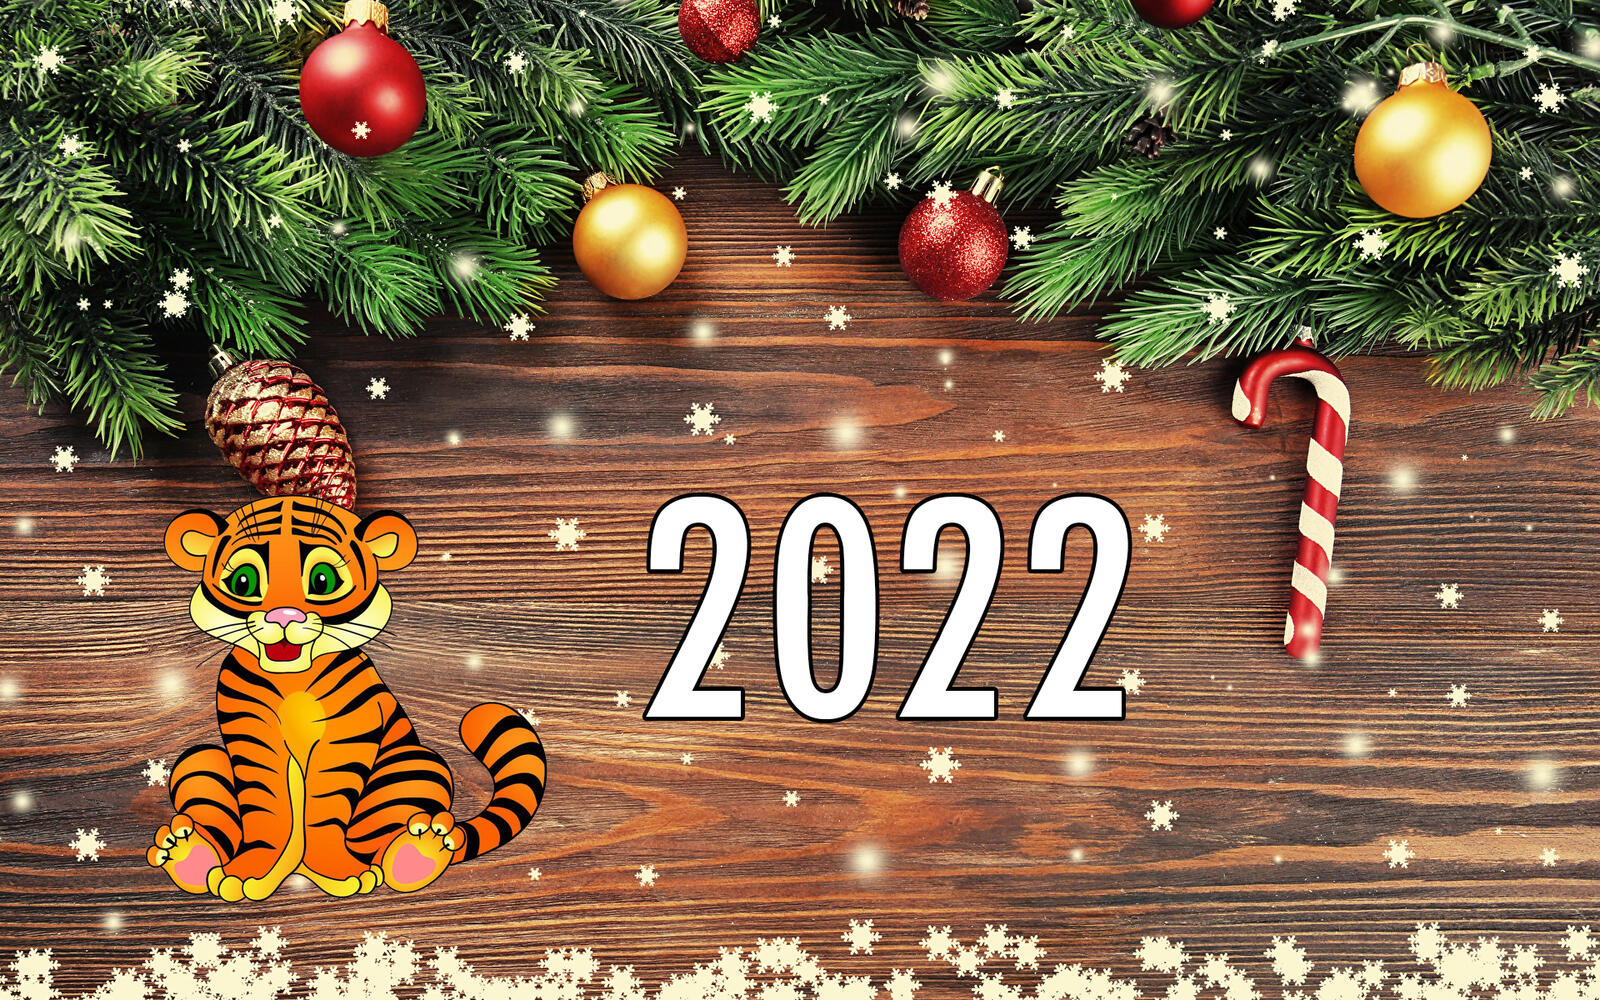 Wallpapers new year 2022 holiday on the desktop